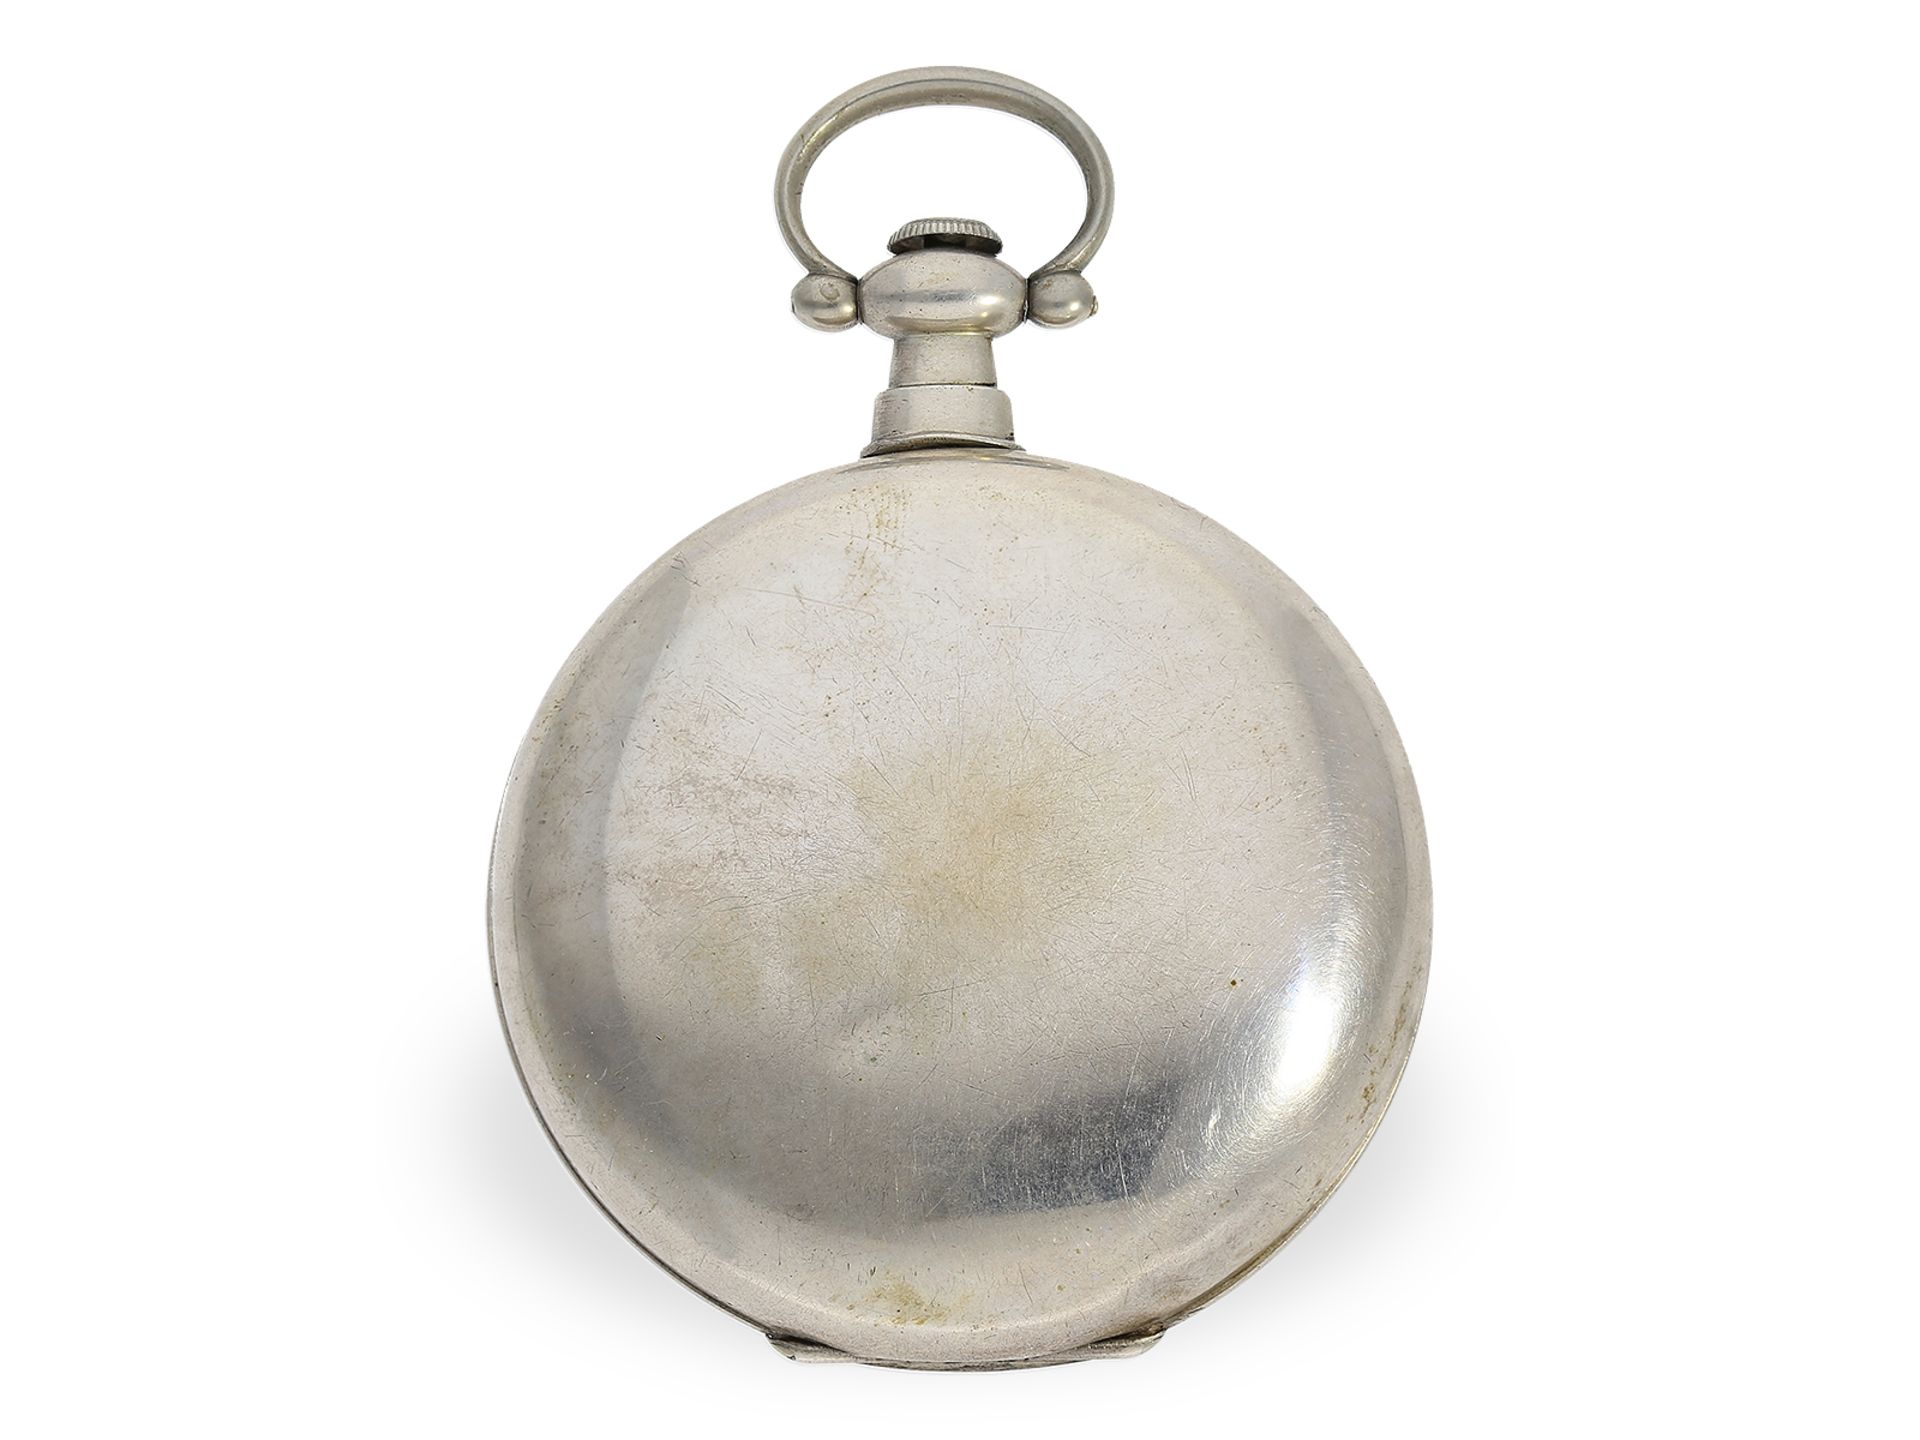 Pocket watch: fine Fleurier pocket watch with centre seconds, Bovet for the Chinese market, ca. 1850 - Image 4 of 5